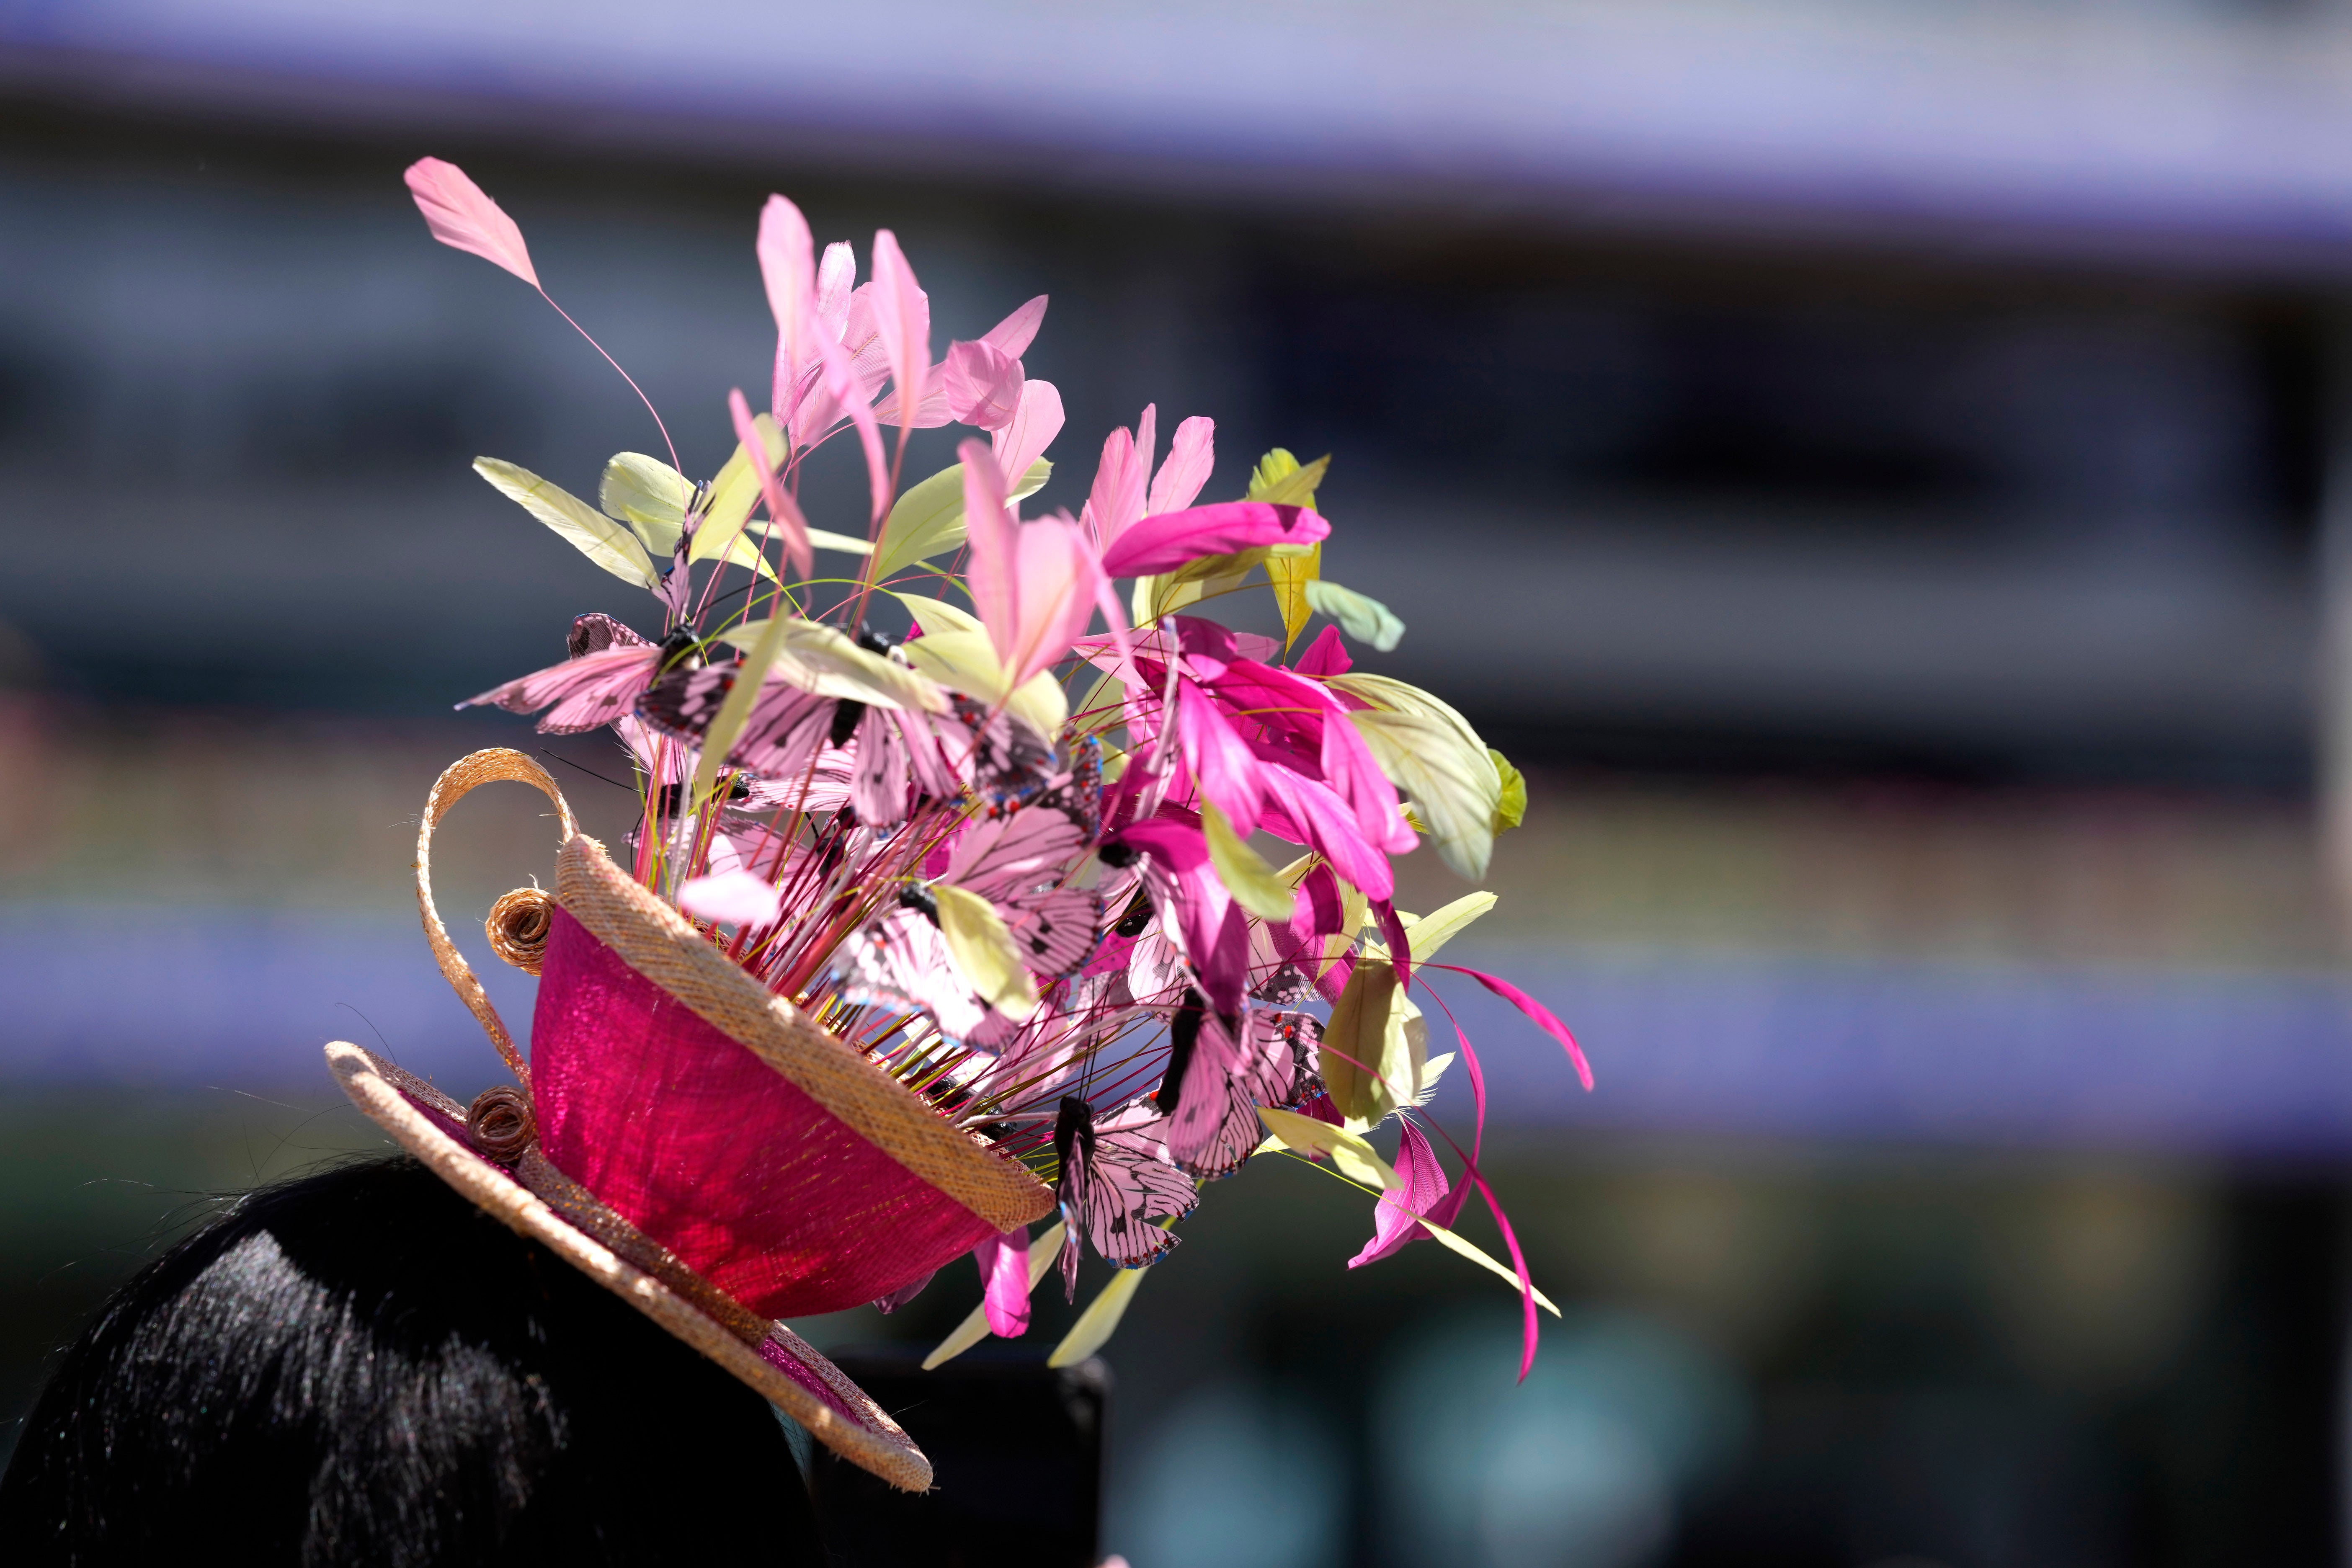 A view hat worn by a racegoer, on the second day of of the Royal Ascot horserace meeting